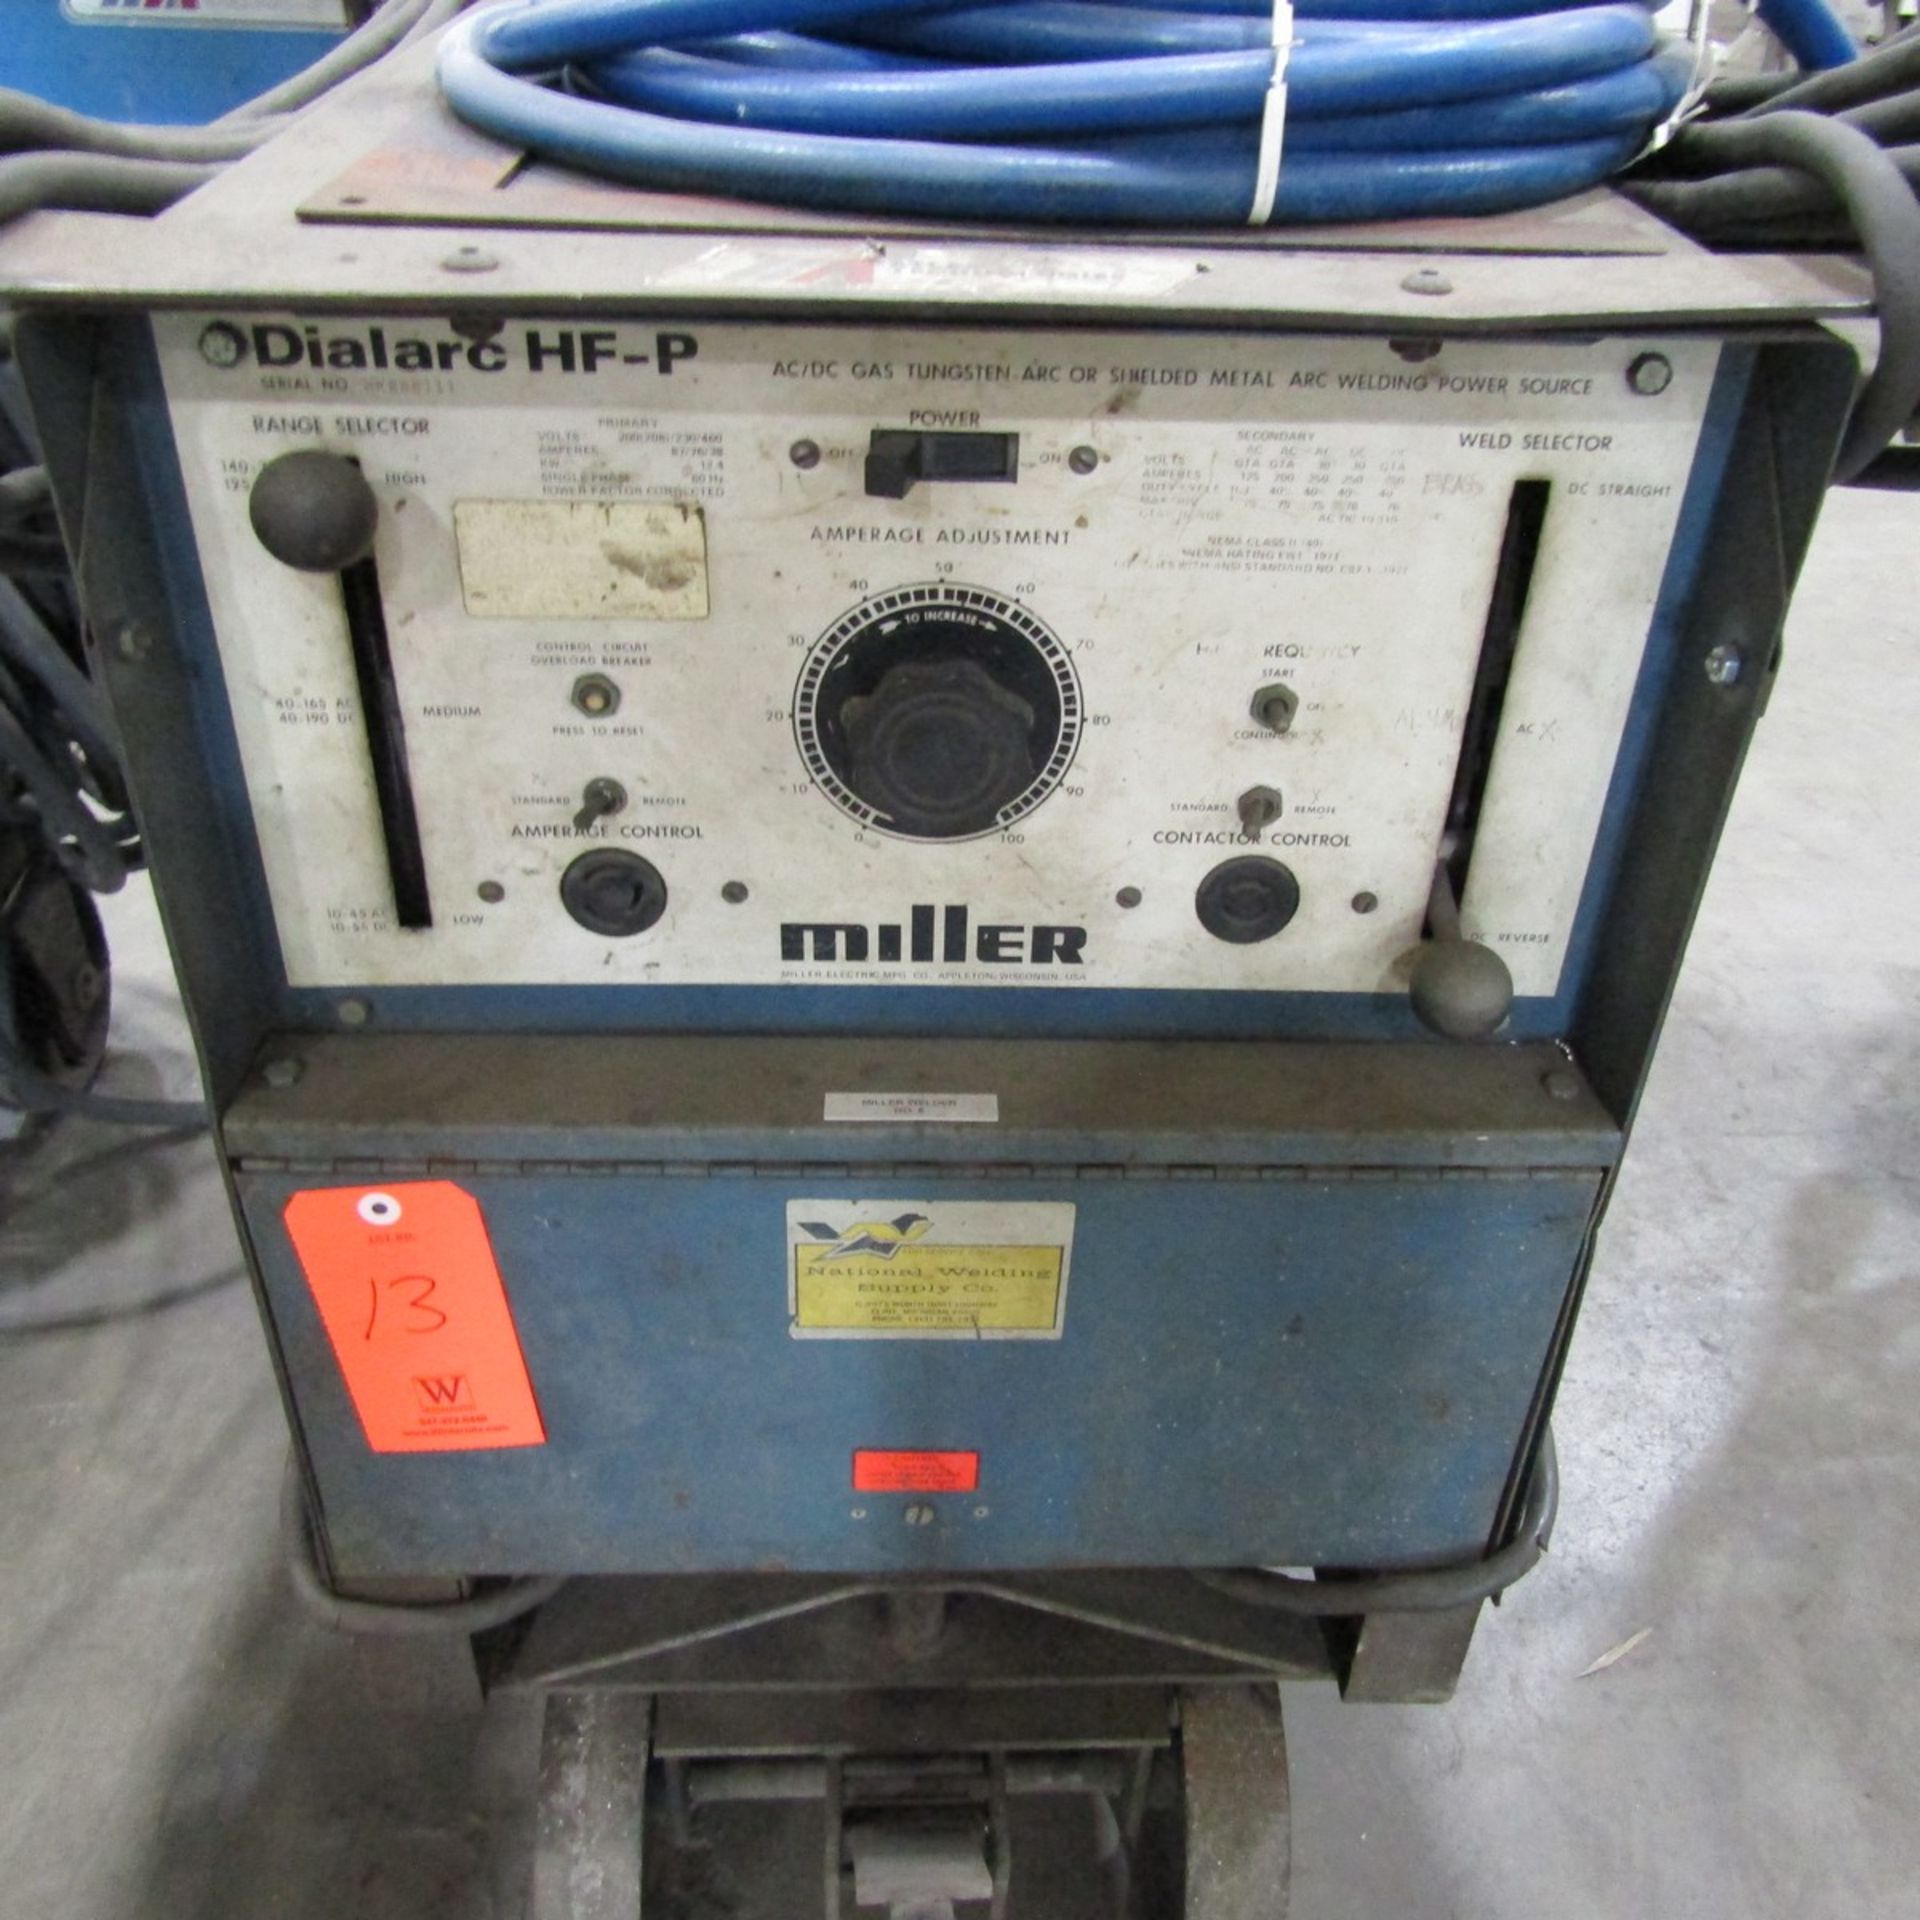 Miller Dialarc HF-P AC/DC Gas Tungsten Arc or Shield Metal Arc Welding Power Source, S/N: - Image 2 of 2